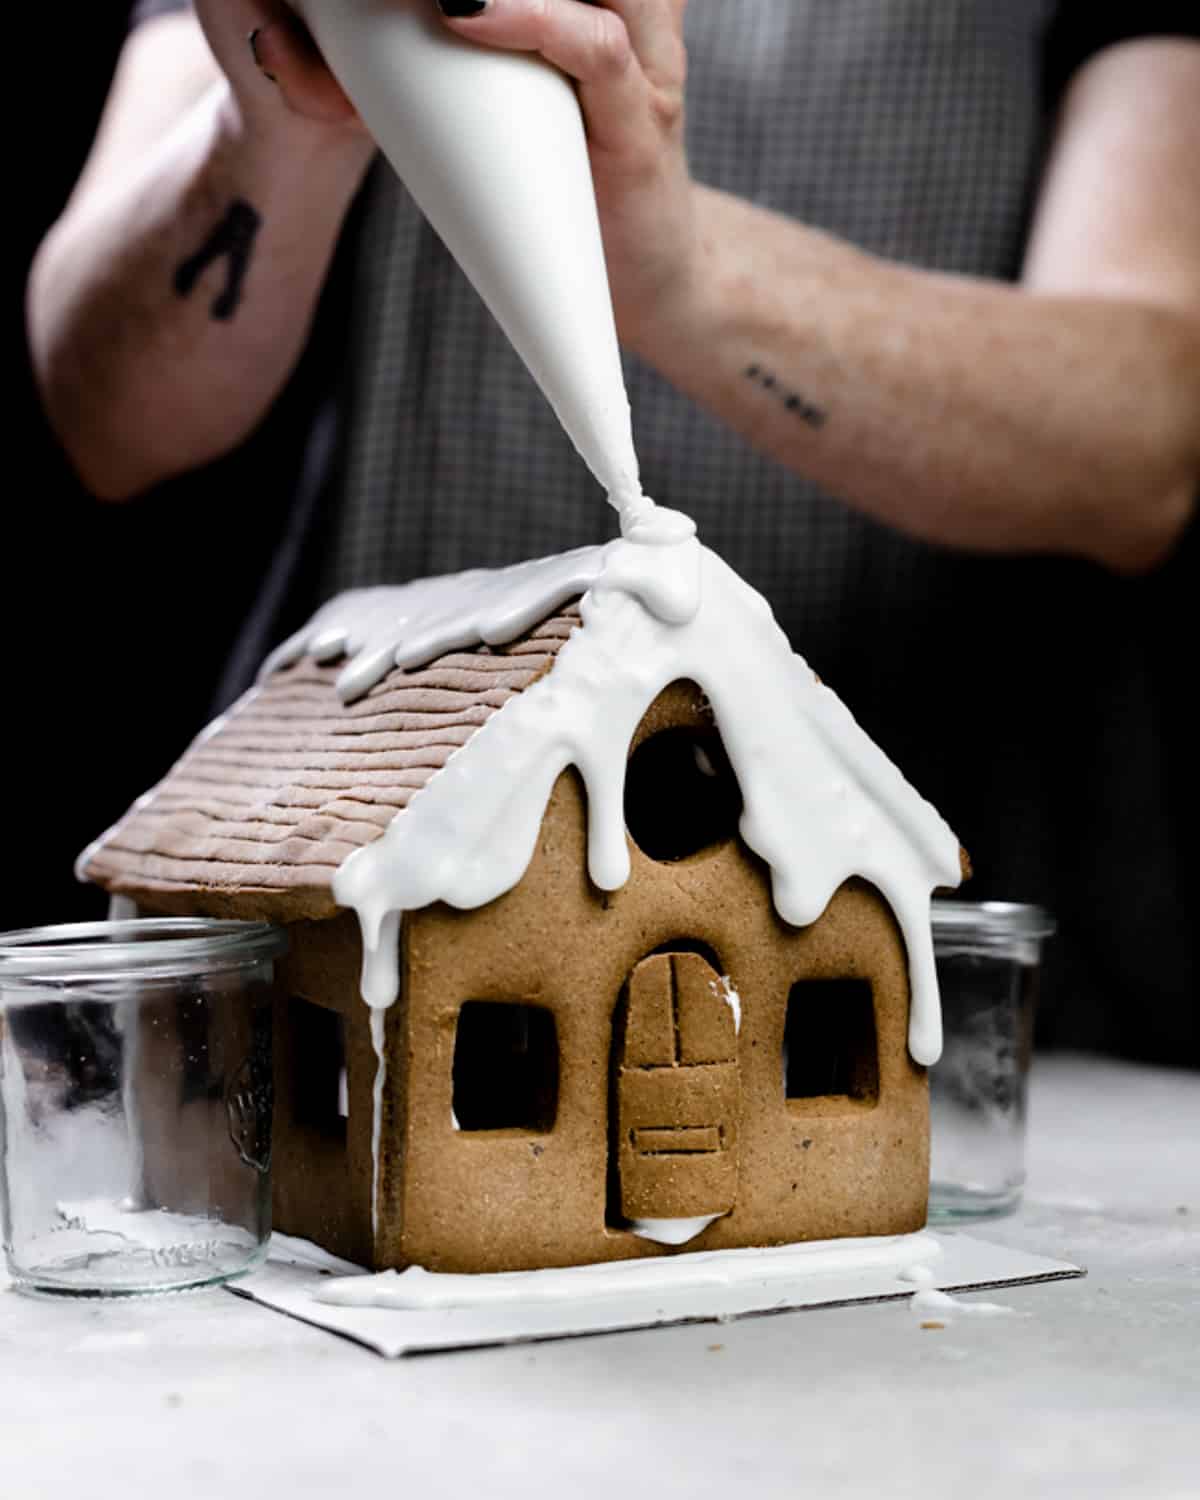 pouring royal icing over gingerbread house.